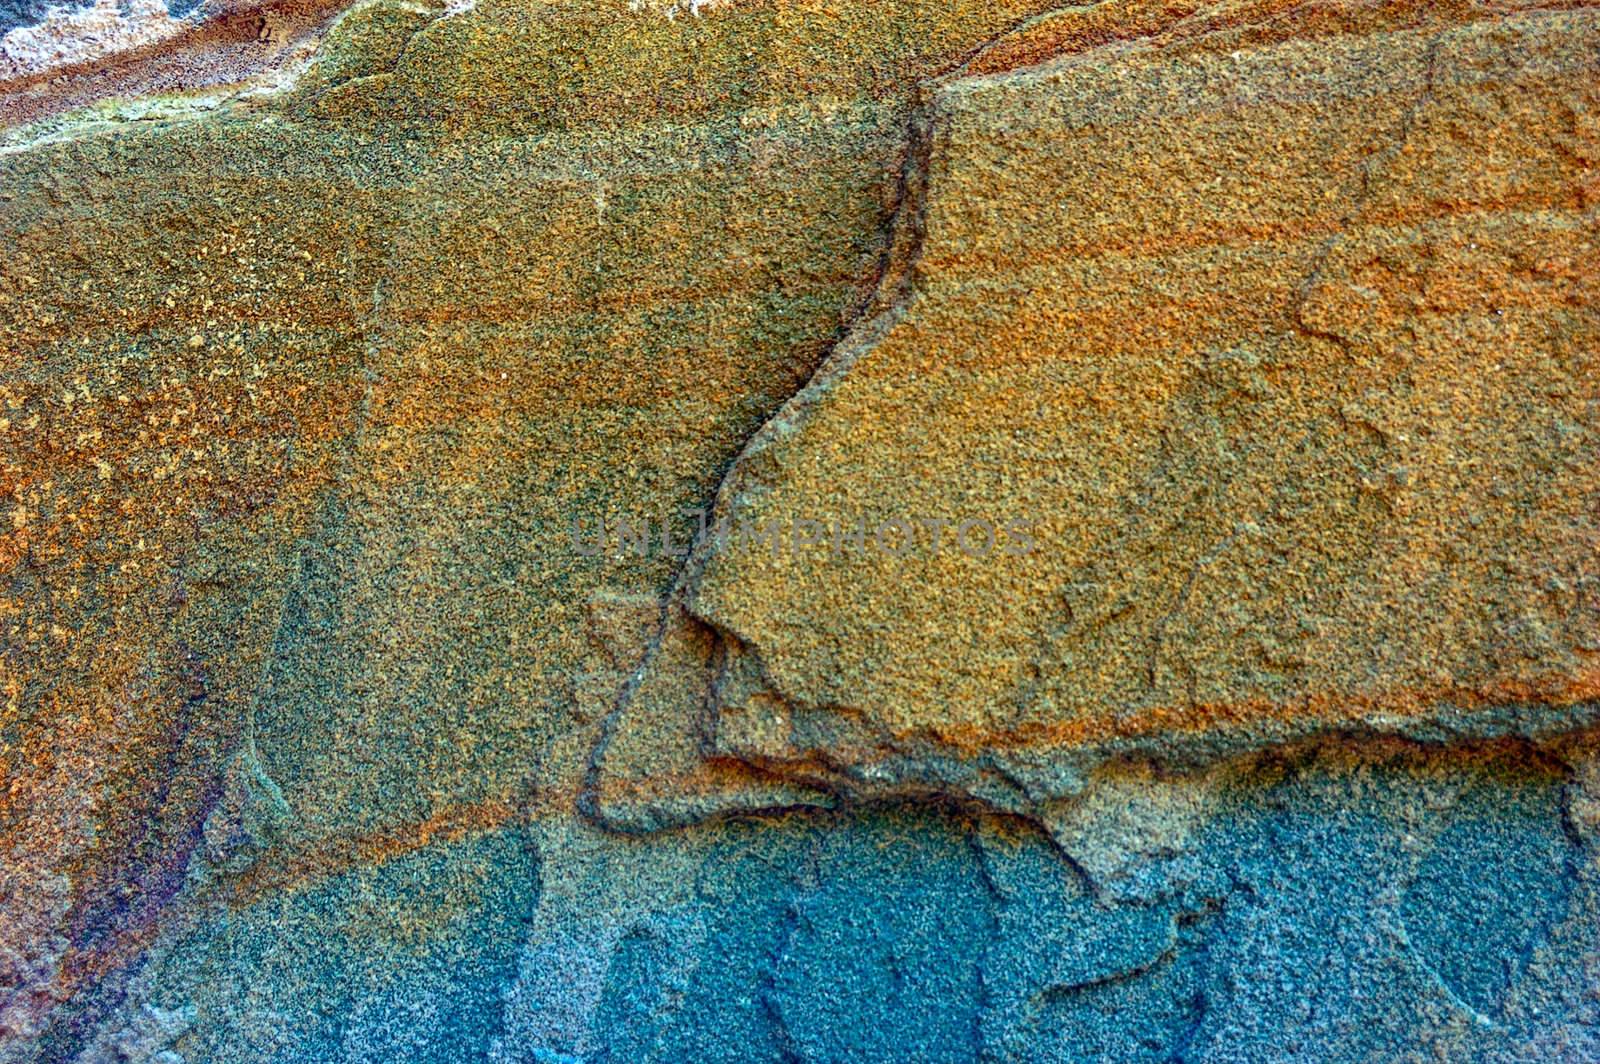 colored (prevaling blue and brown) rough stone surface